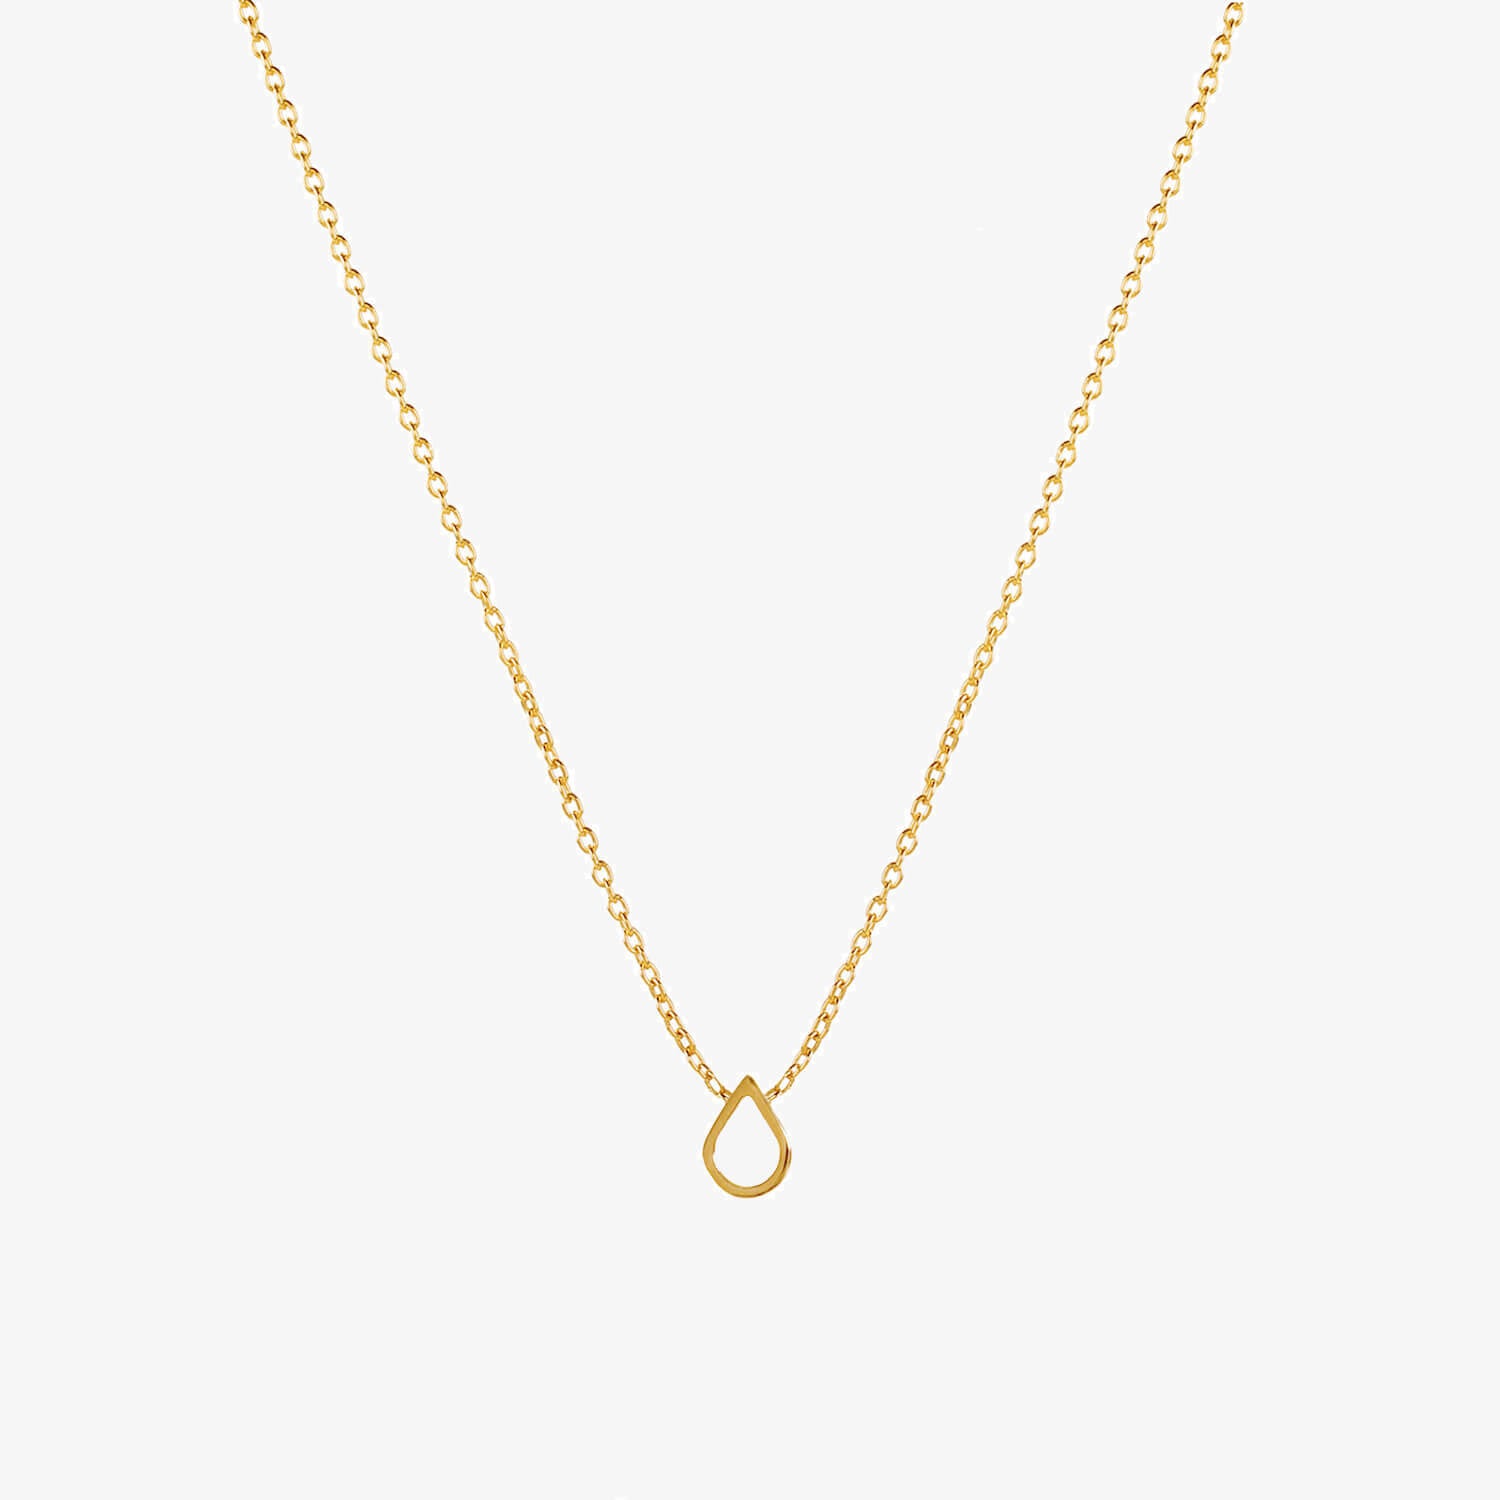 Small teardrop shaped charm on a chain in gold